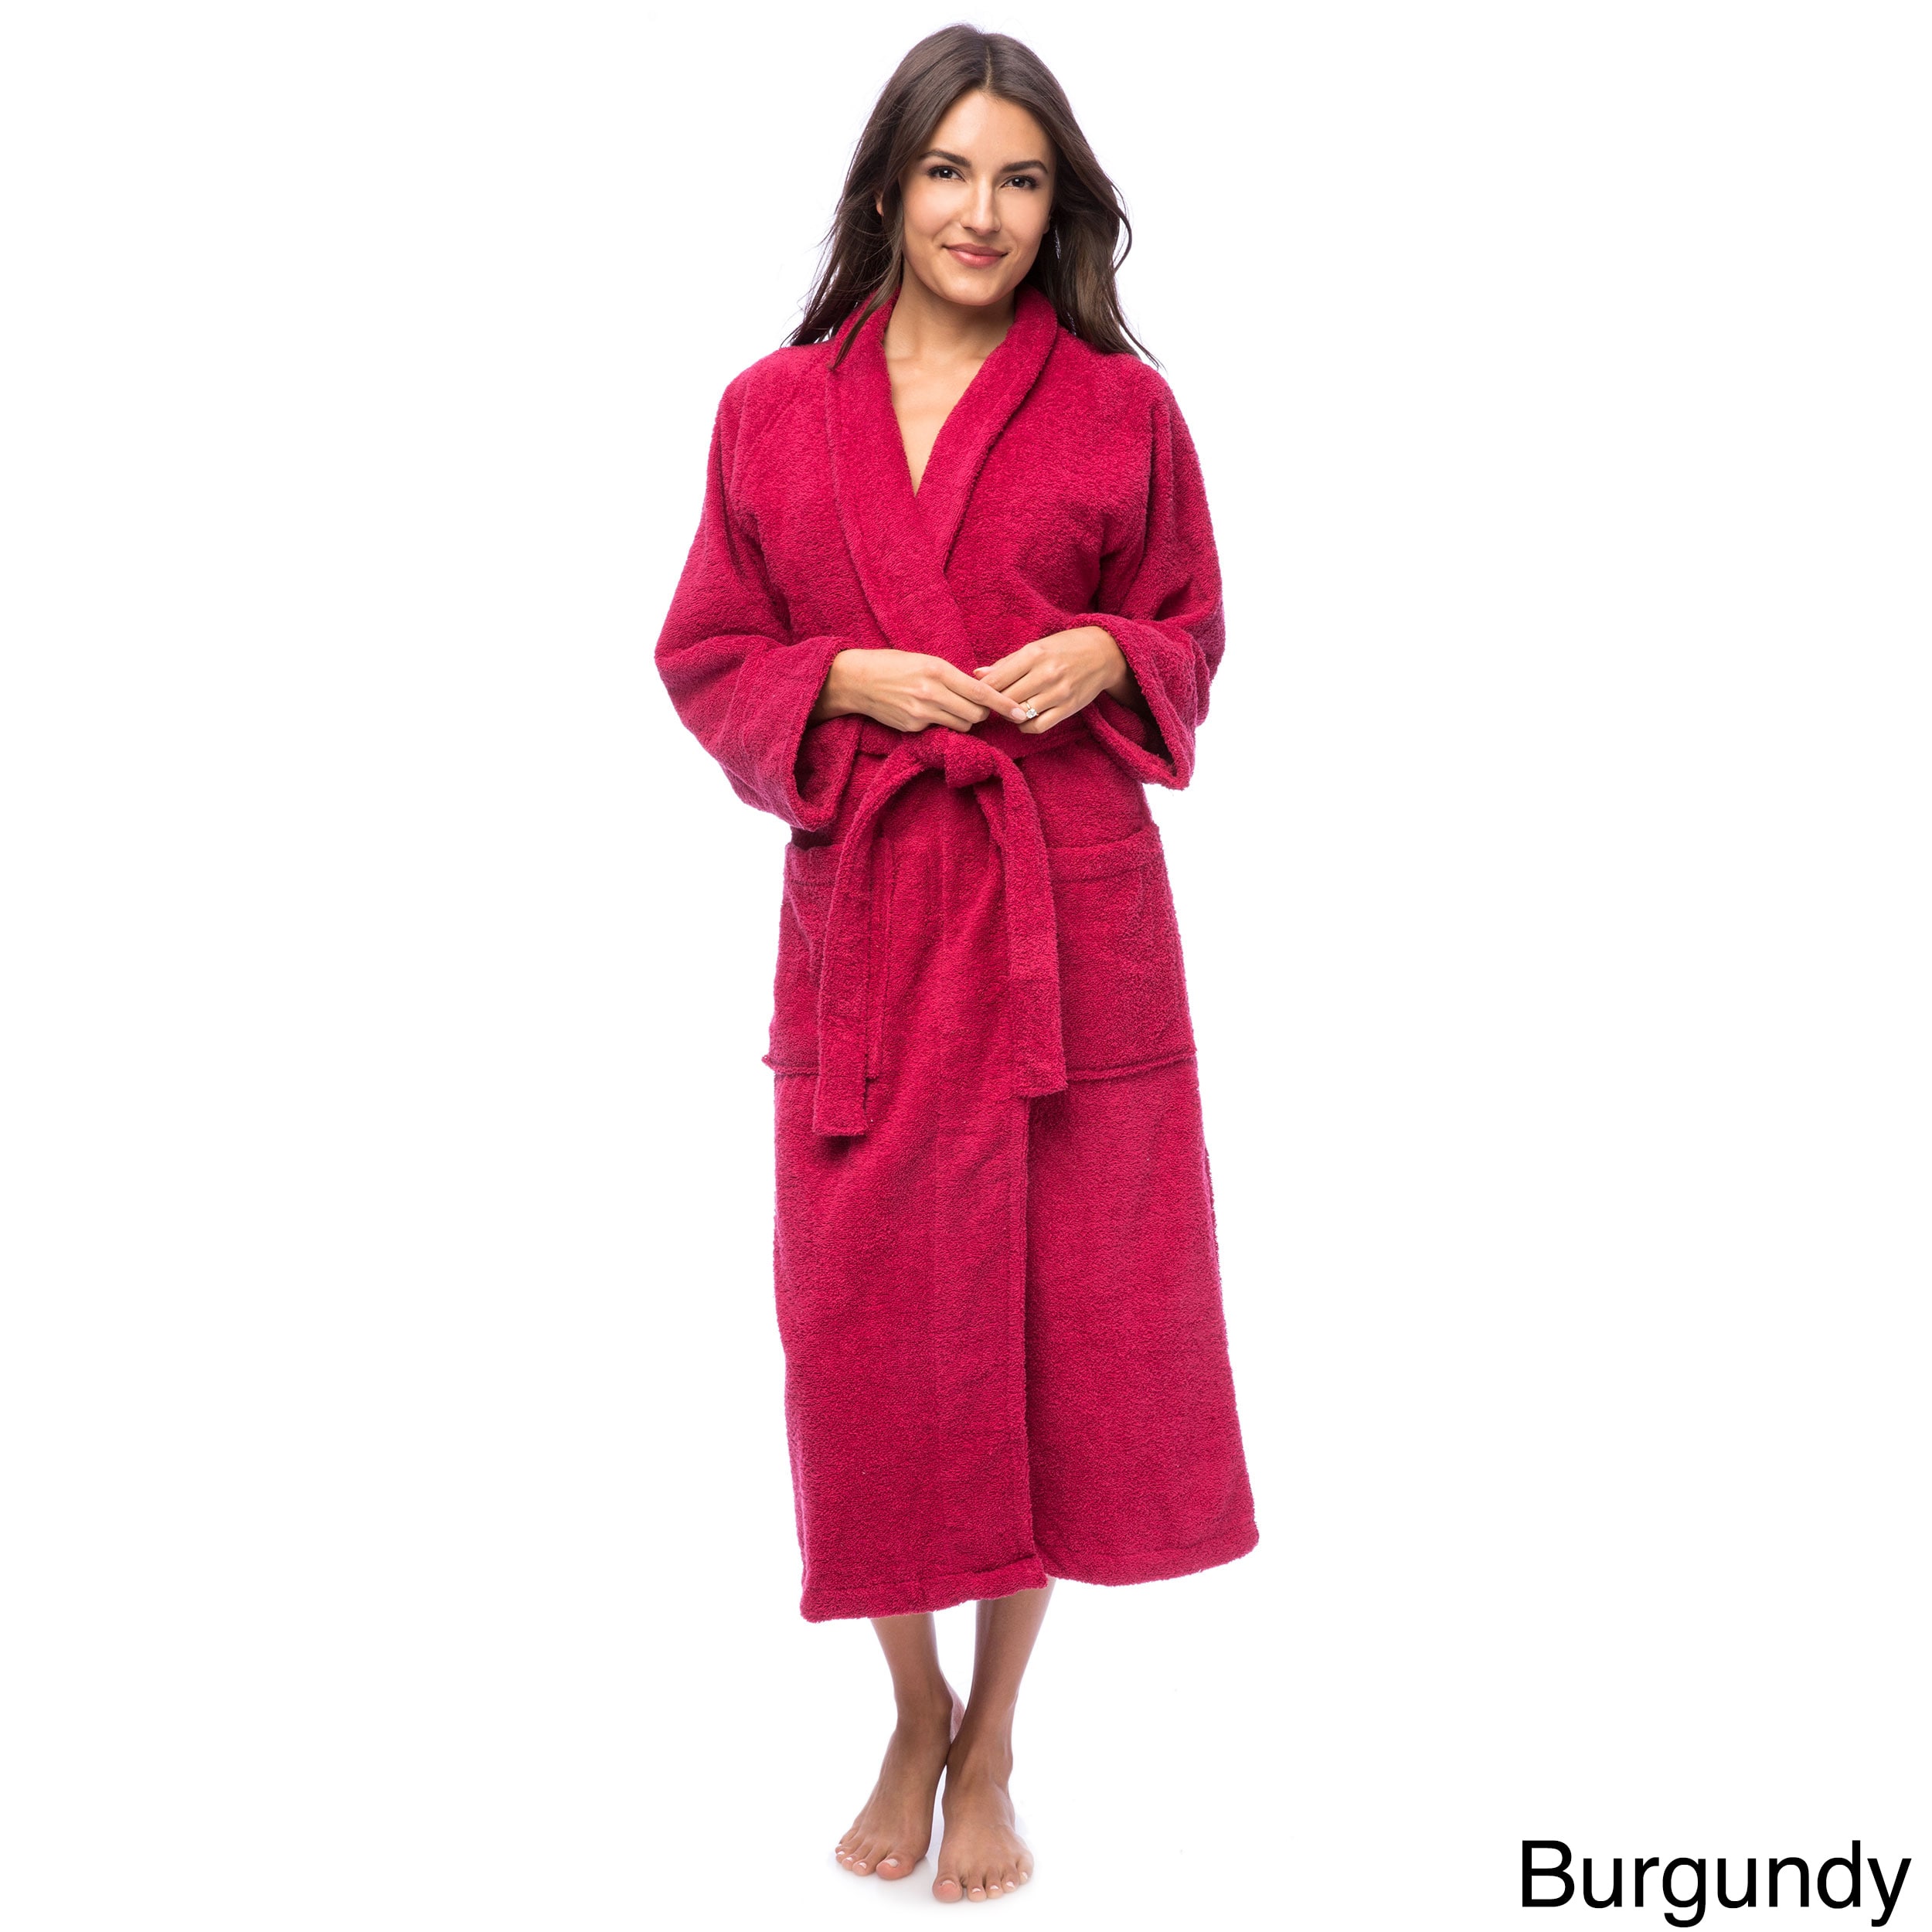 Details about  / 100/% Cotton Terry Towel Bath Robe Hooded Men Women Dressing Gown Unisex White